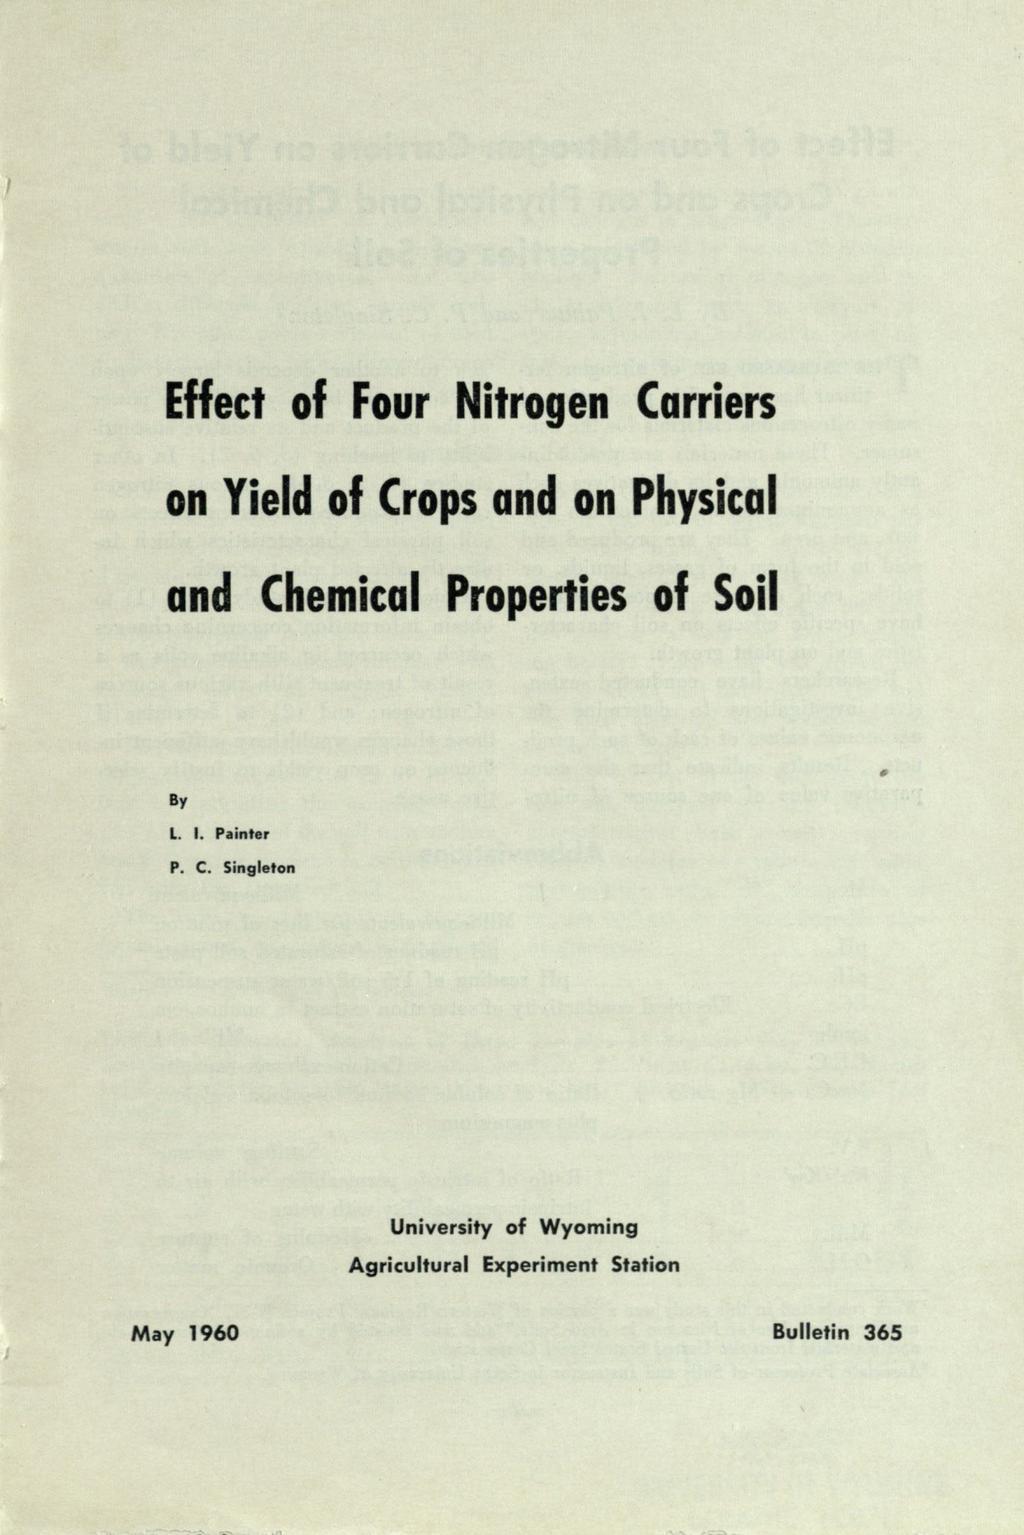 Effect f Fur Nitrgen Carriers n Yield f Crps and n Physical and Chemical Prperties f Sil By L. I.